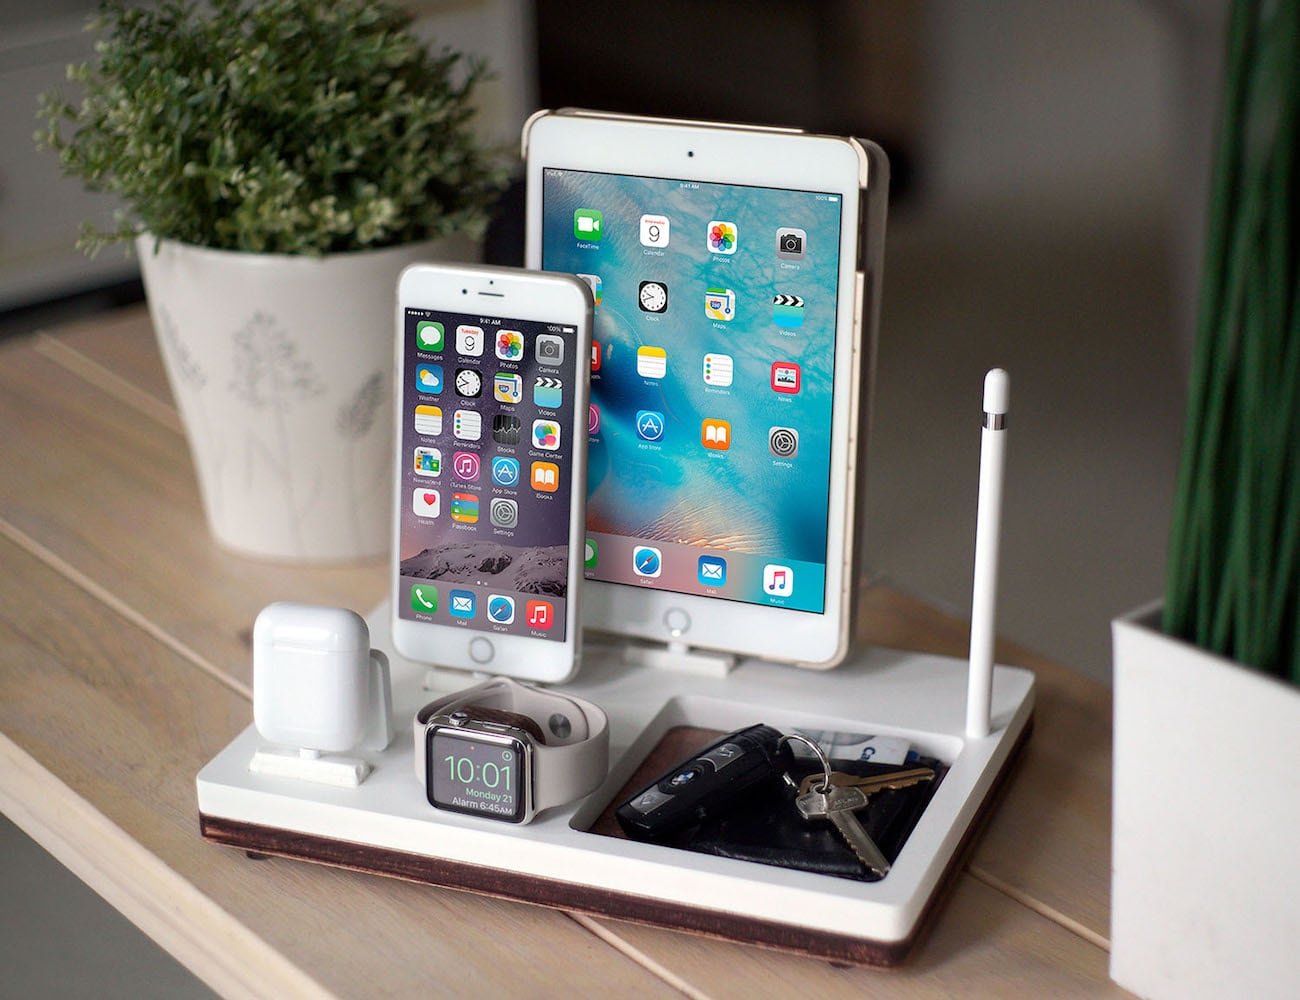 NytStnd Multi-Device Charging Station organizes all your devices